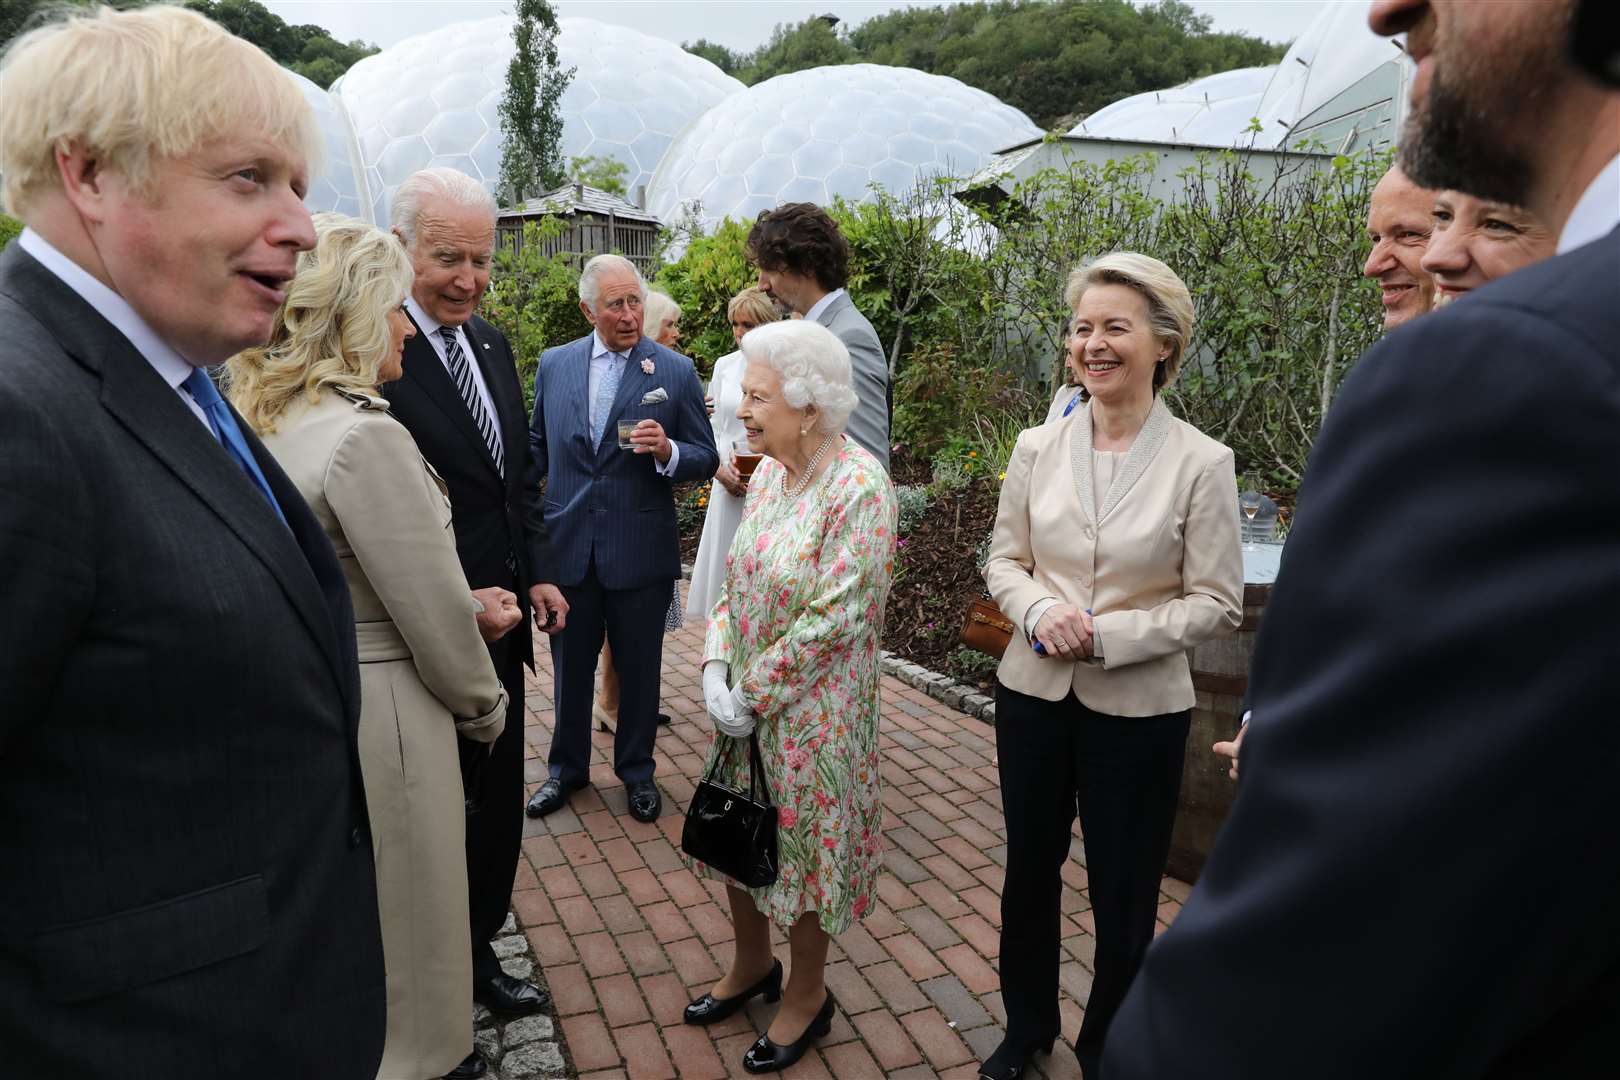 The Queen speaks to US President Joe Biden and his wife Jill at a reception at the Eden Project with Prime Minister Boris Johnson and G7 leaders (PA)